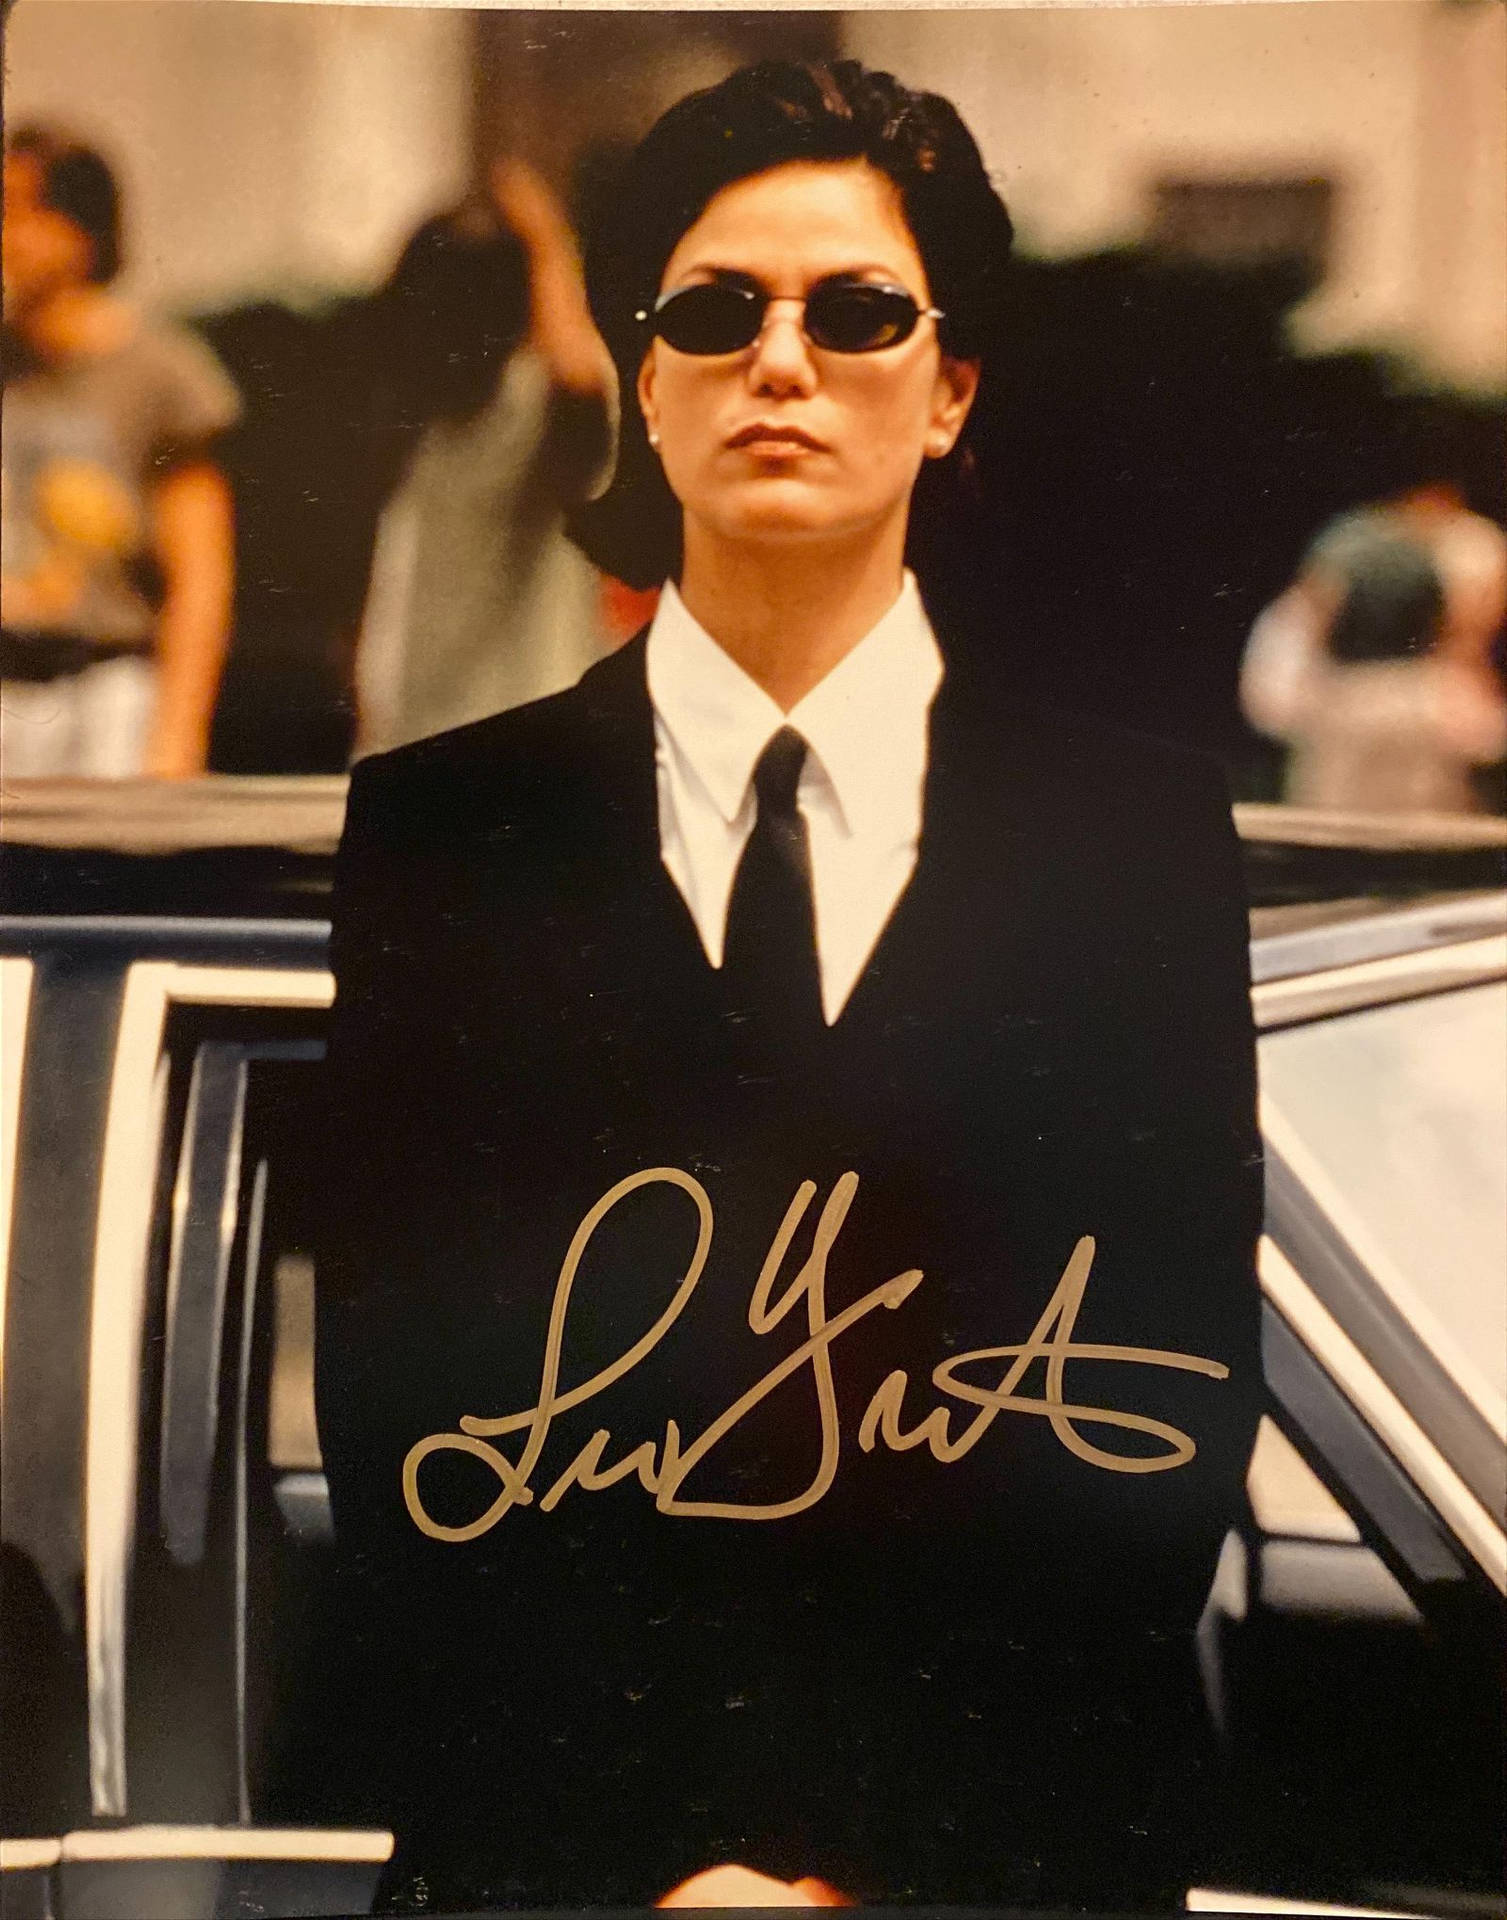 Linda Fiorentino in character as Agent L Wallpaper